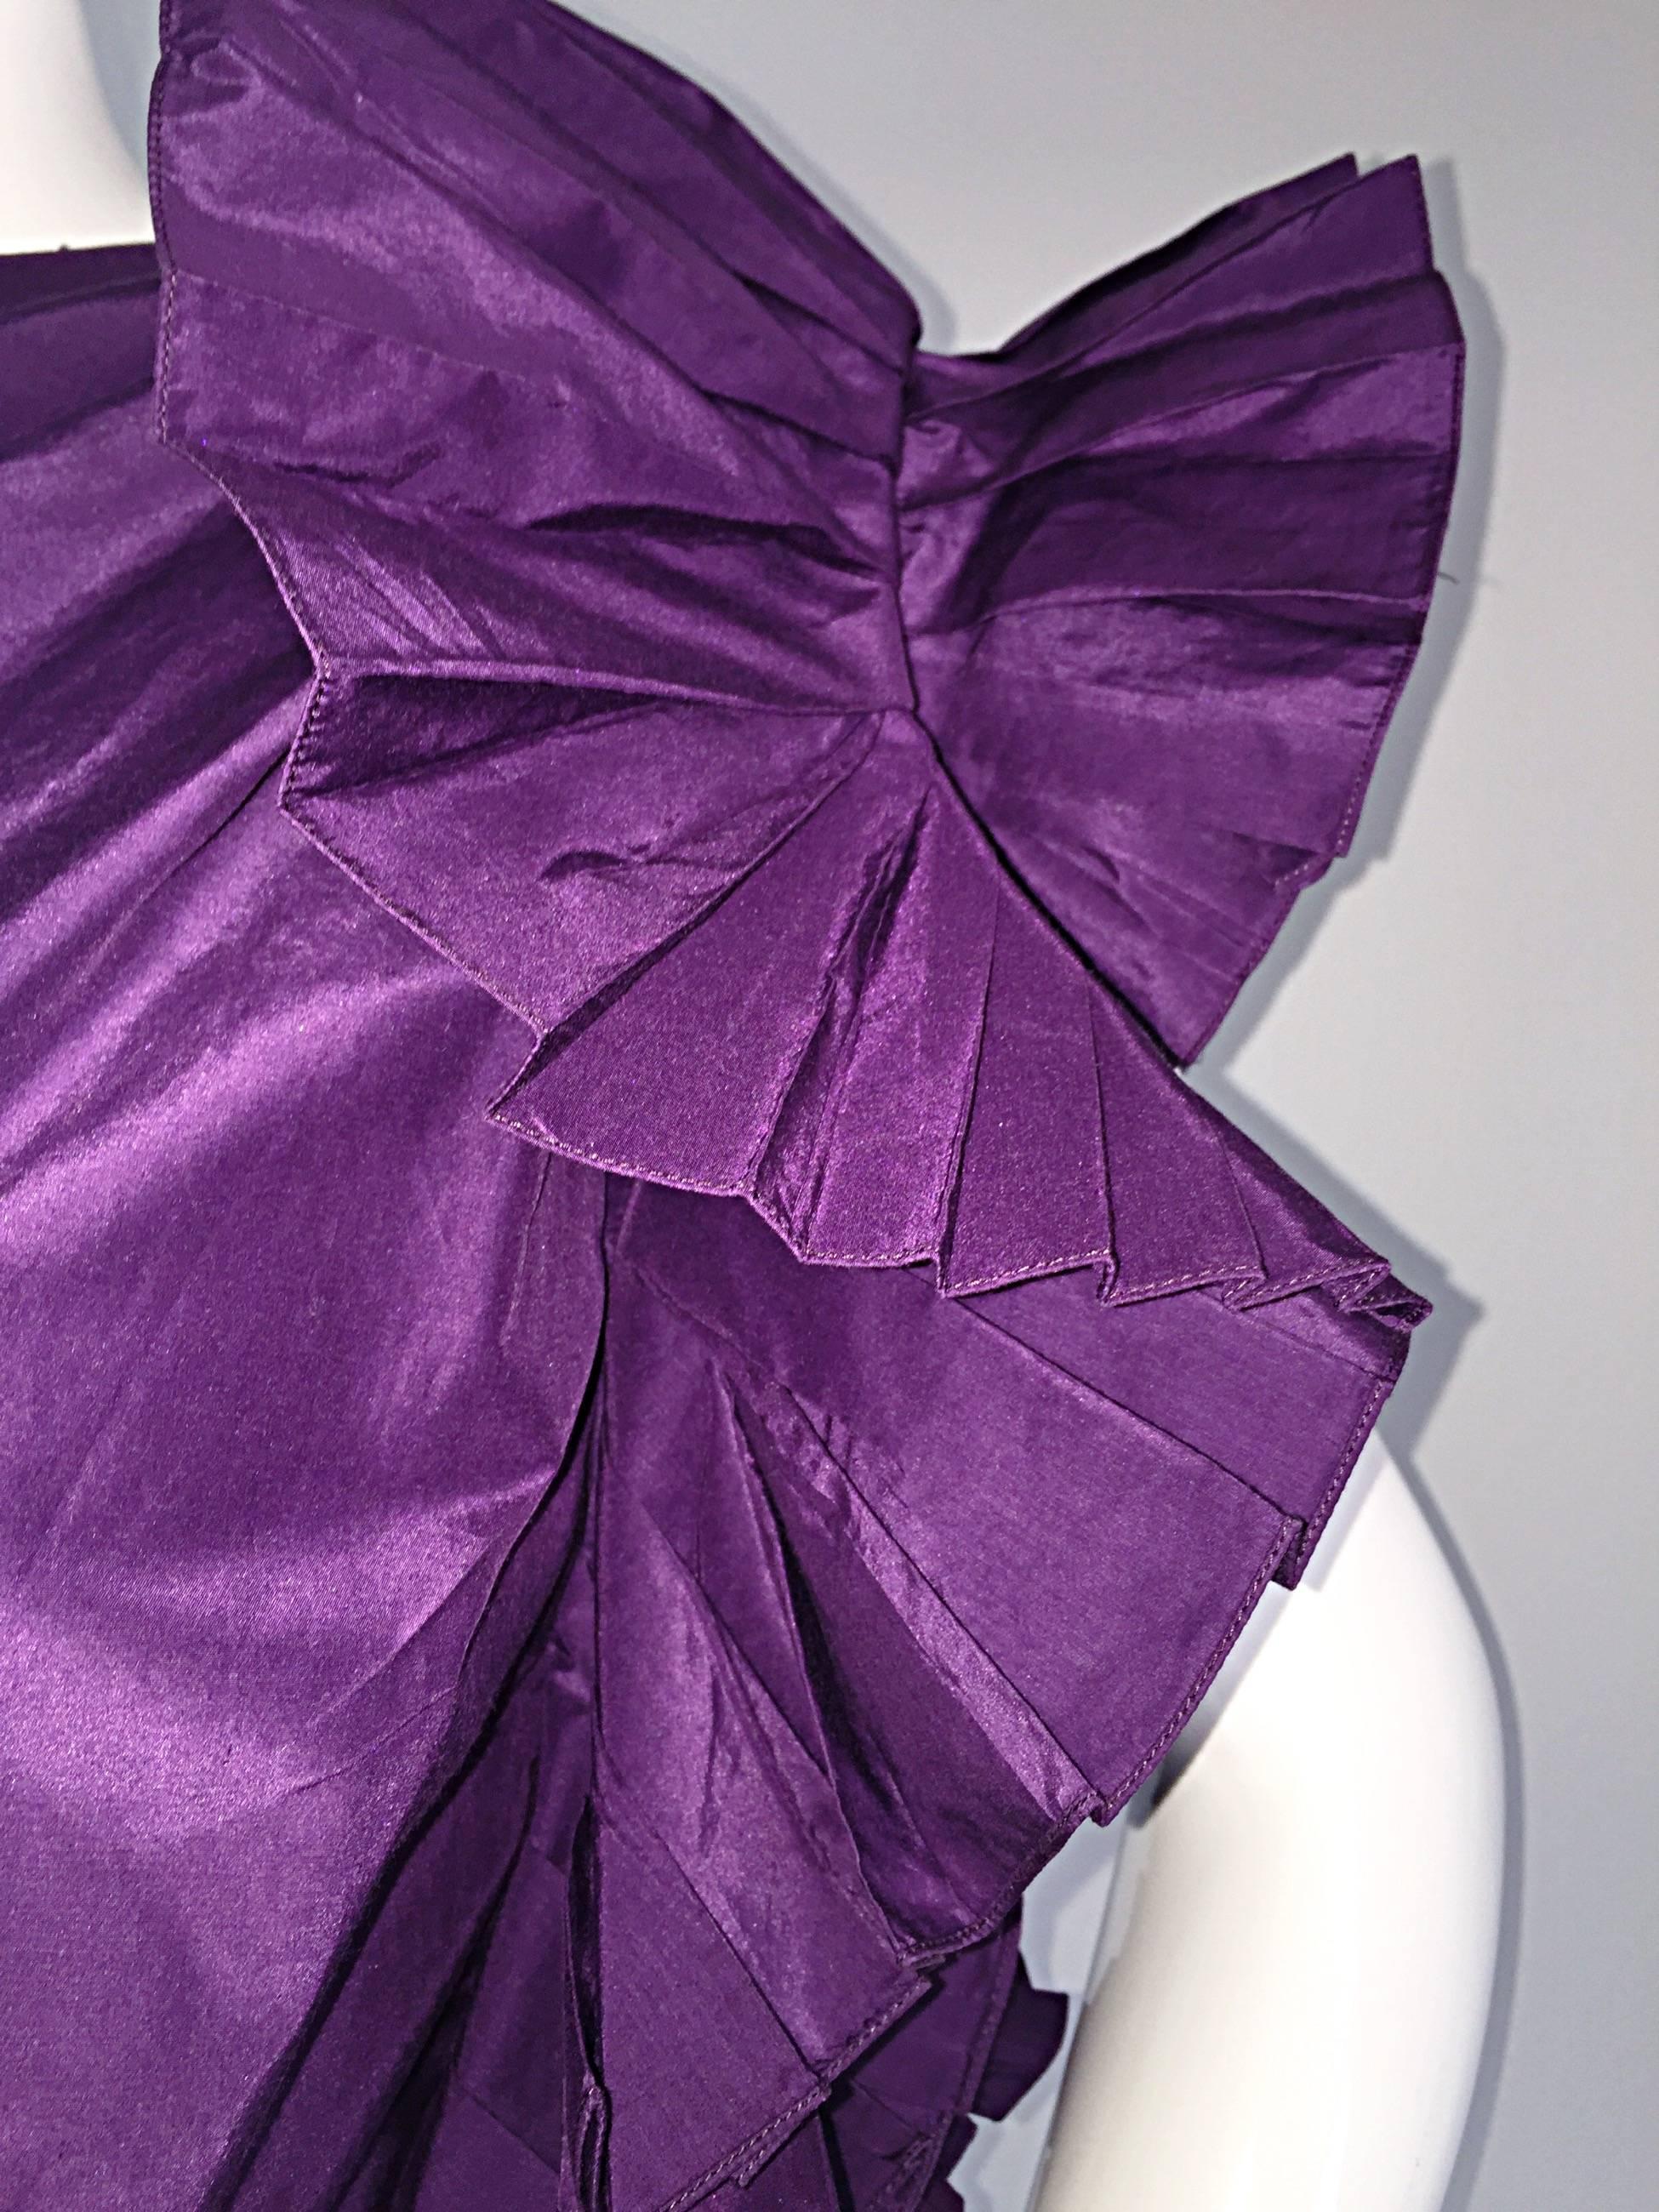 Vintage Gianfranco Ferre Rich Purple Silk Origami One Shoulder Toga Dress In Excellent Condition For Sale In San Diego, CA